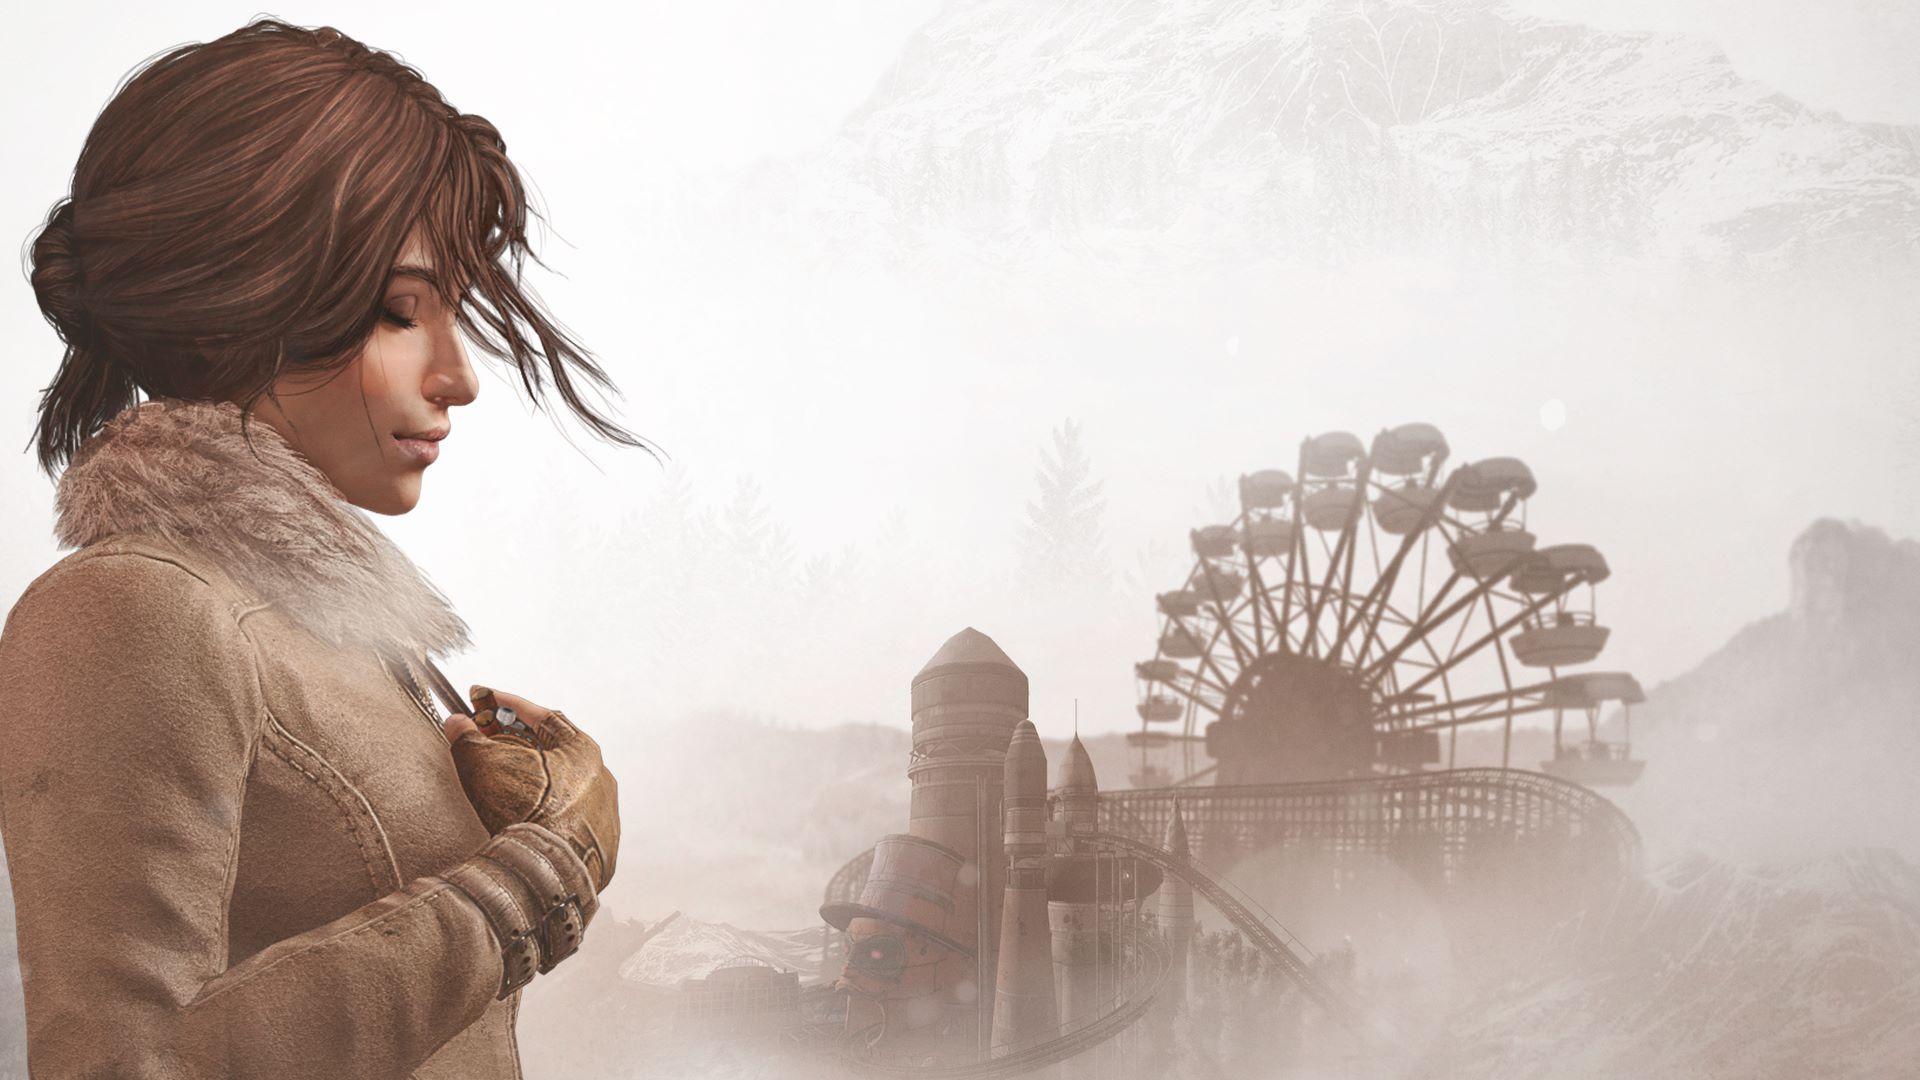 Syberia 3 for Nintendo Switch Release Date Revealed